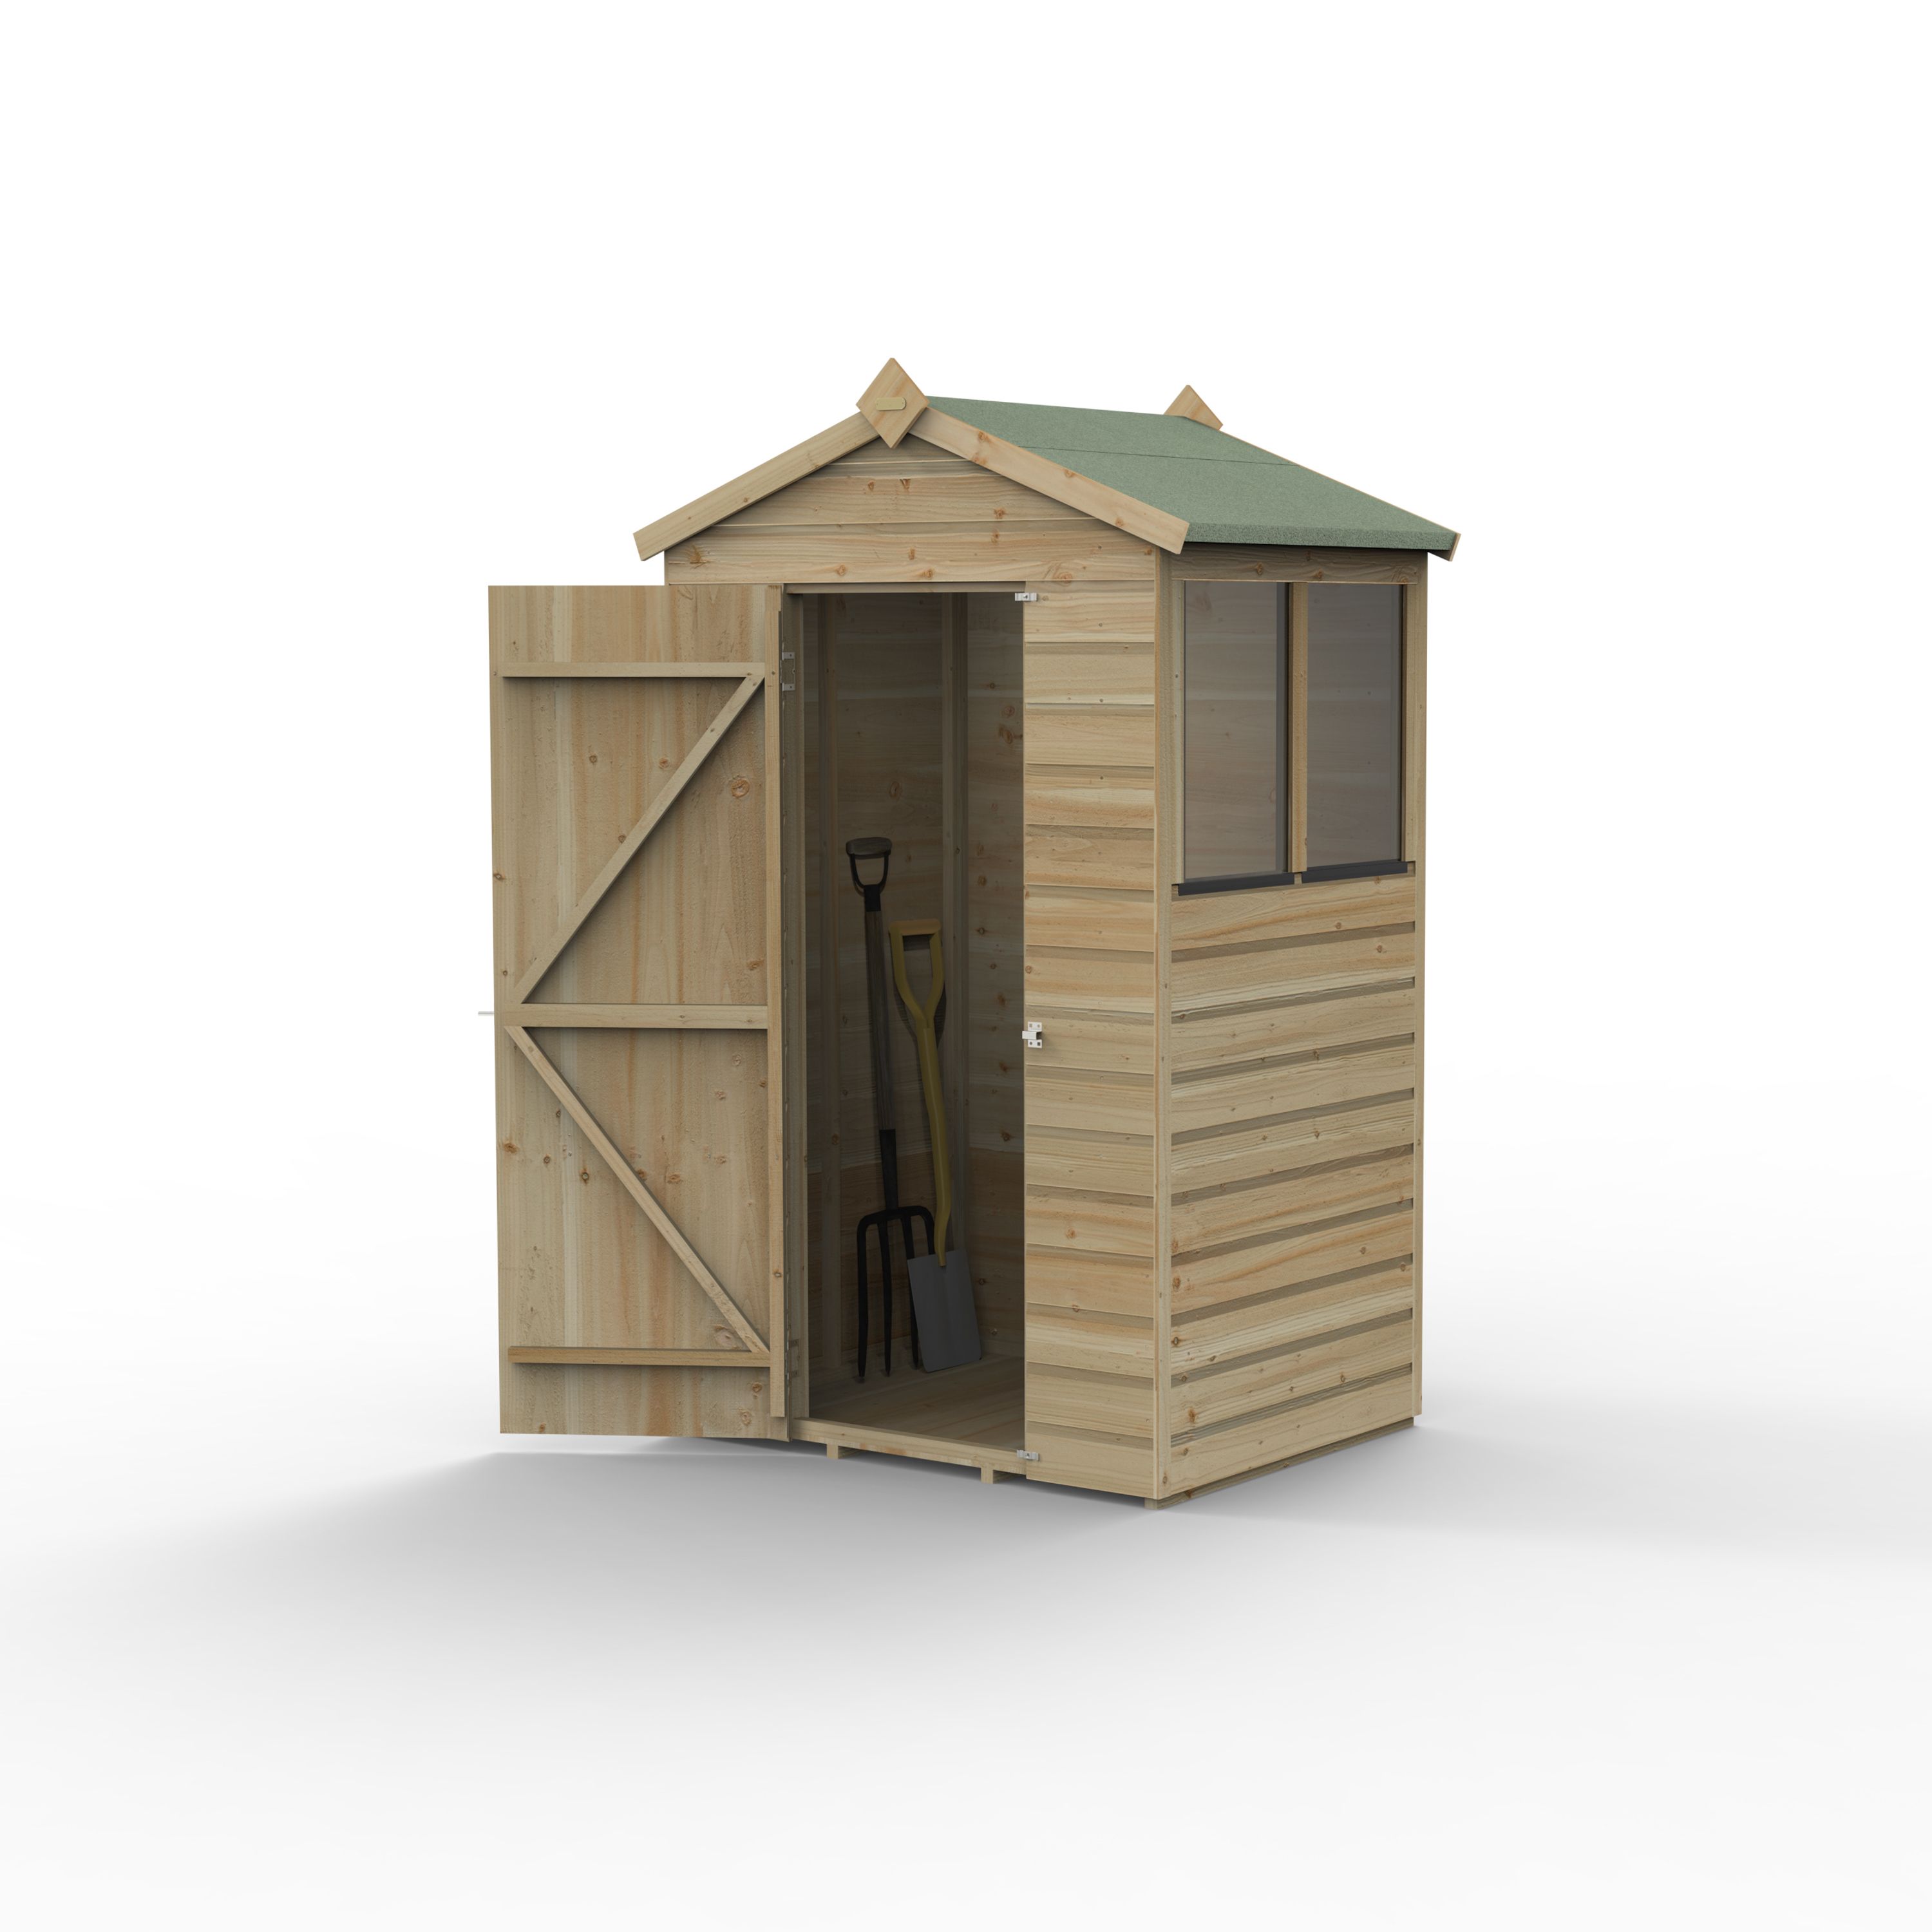 Forest Garden Beckwood 4x3 ft Apex Natural timber Wooden Shed with floor & 2 windows (Base included)